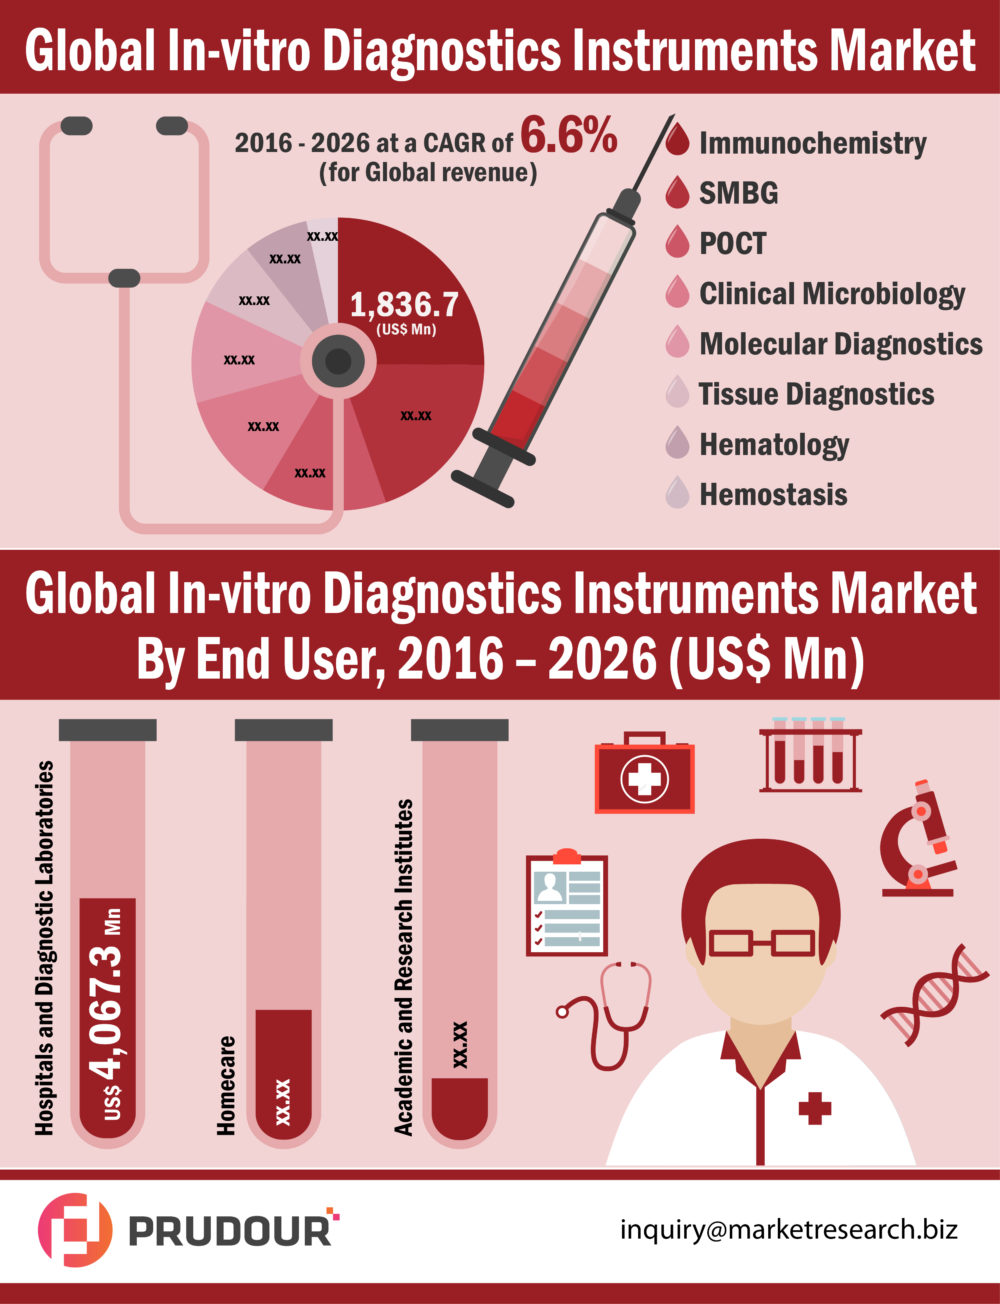 Global In-vitro Diagnostics Instruments Market Growth CAGR of 6.6% from 2017 to 2026.